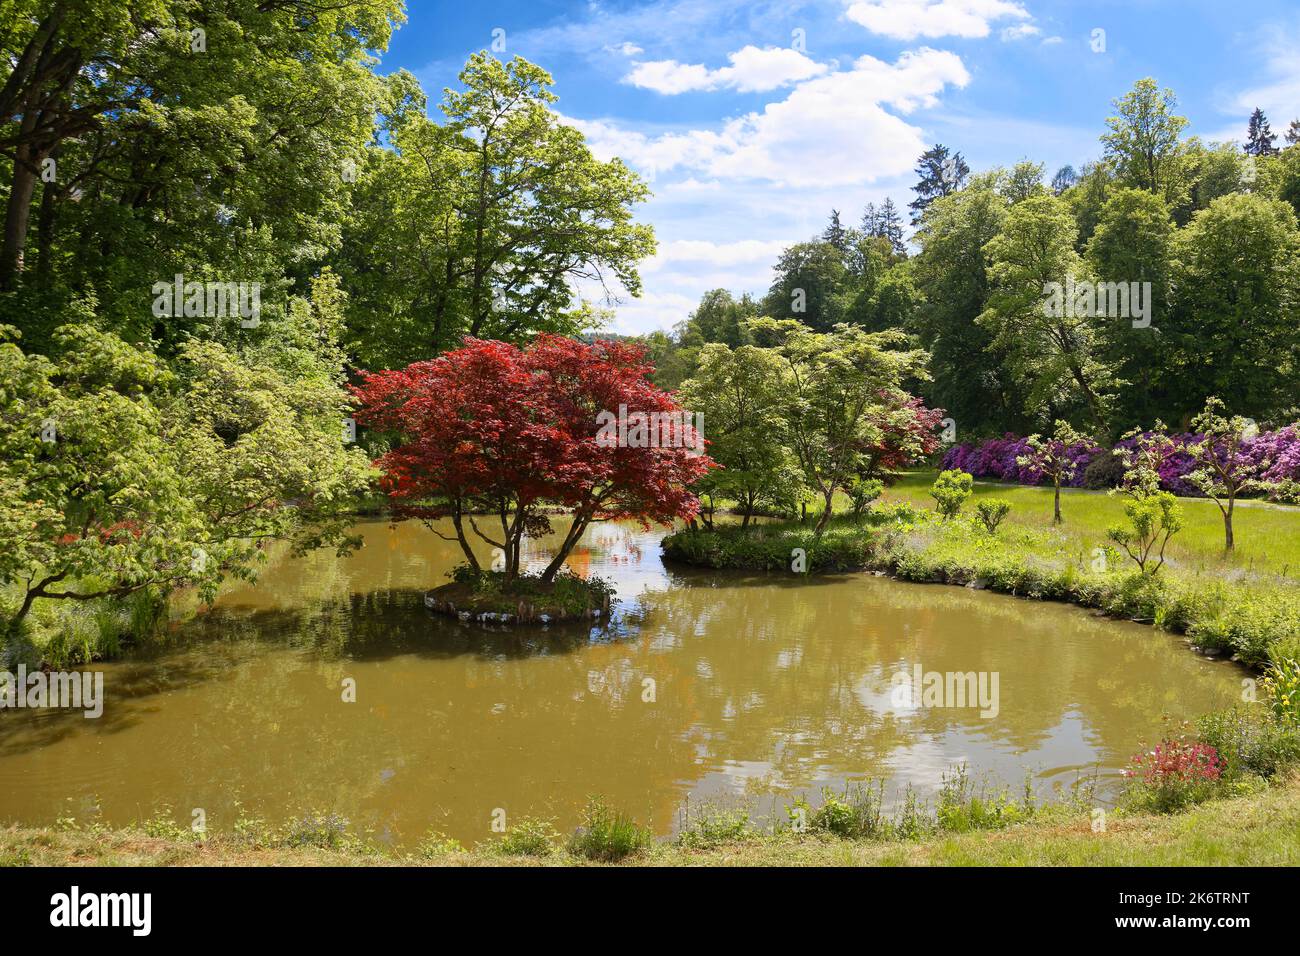 Smooth japanese maple (Acer palmatum) on small island in pond, castle park, created 18th century pond, rhododendron blossom in the back, Berleburg Stock Photo